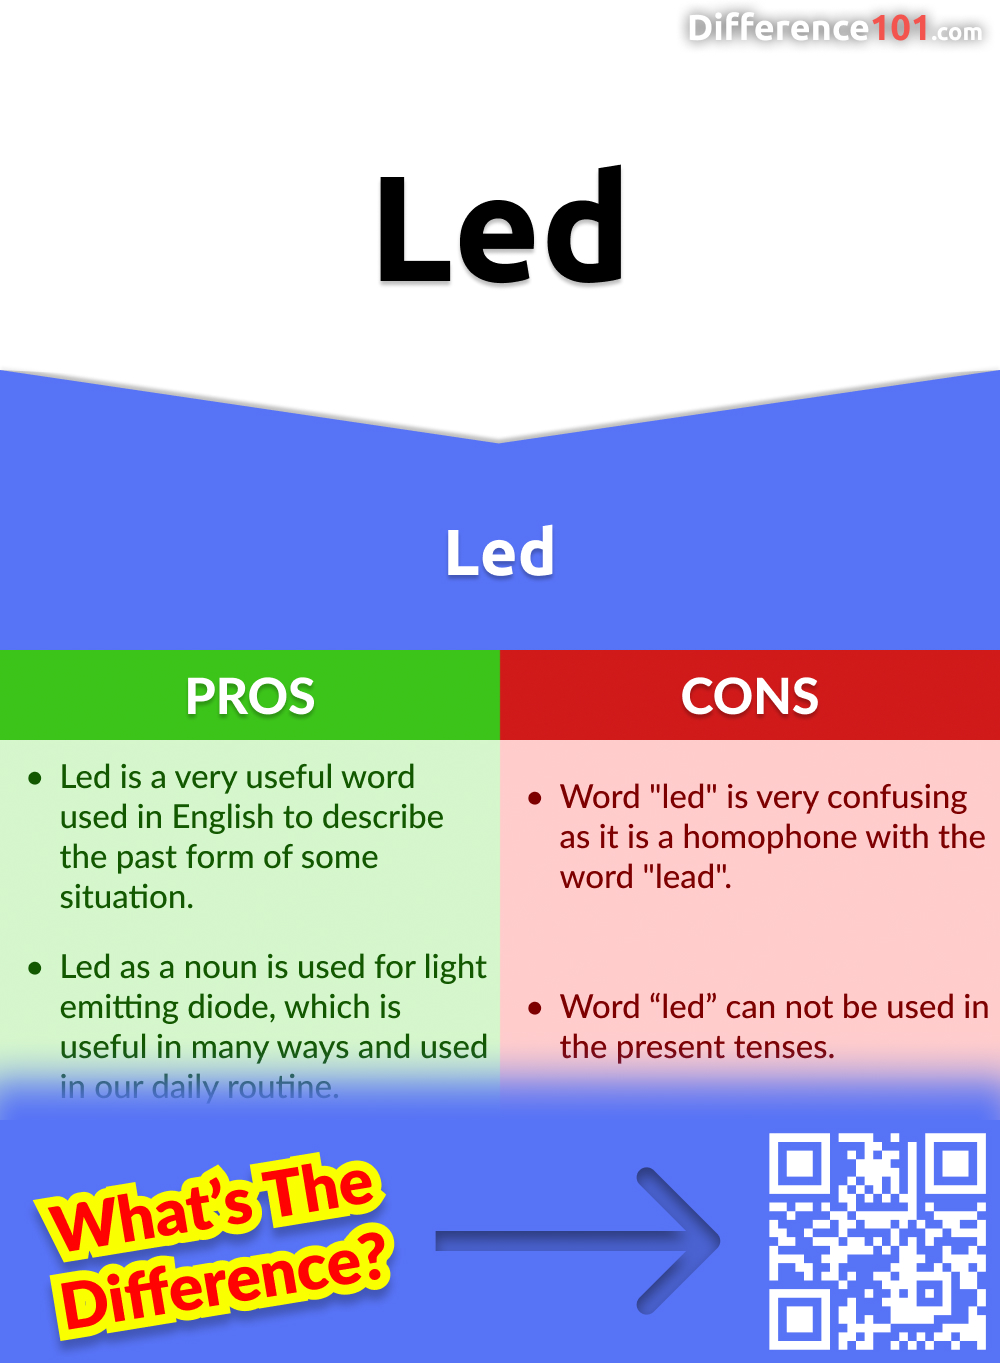 Led Pros and Cons
